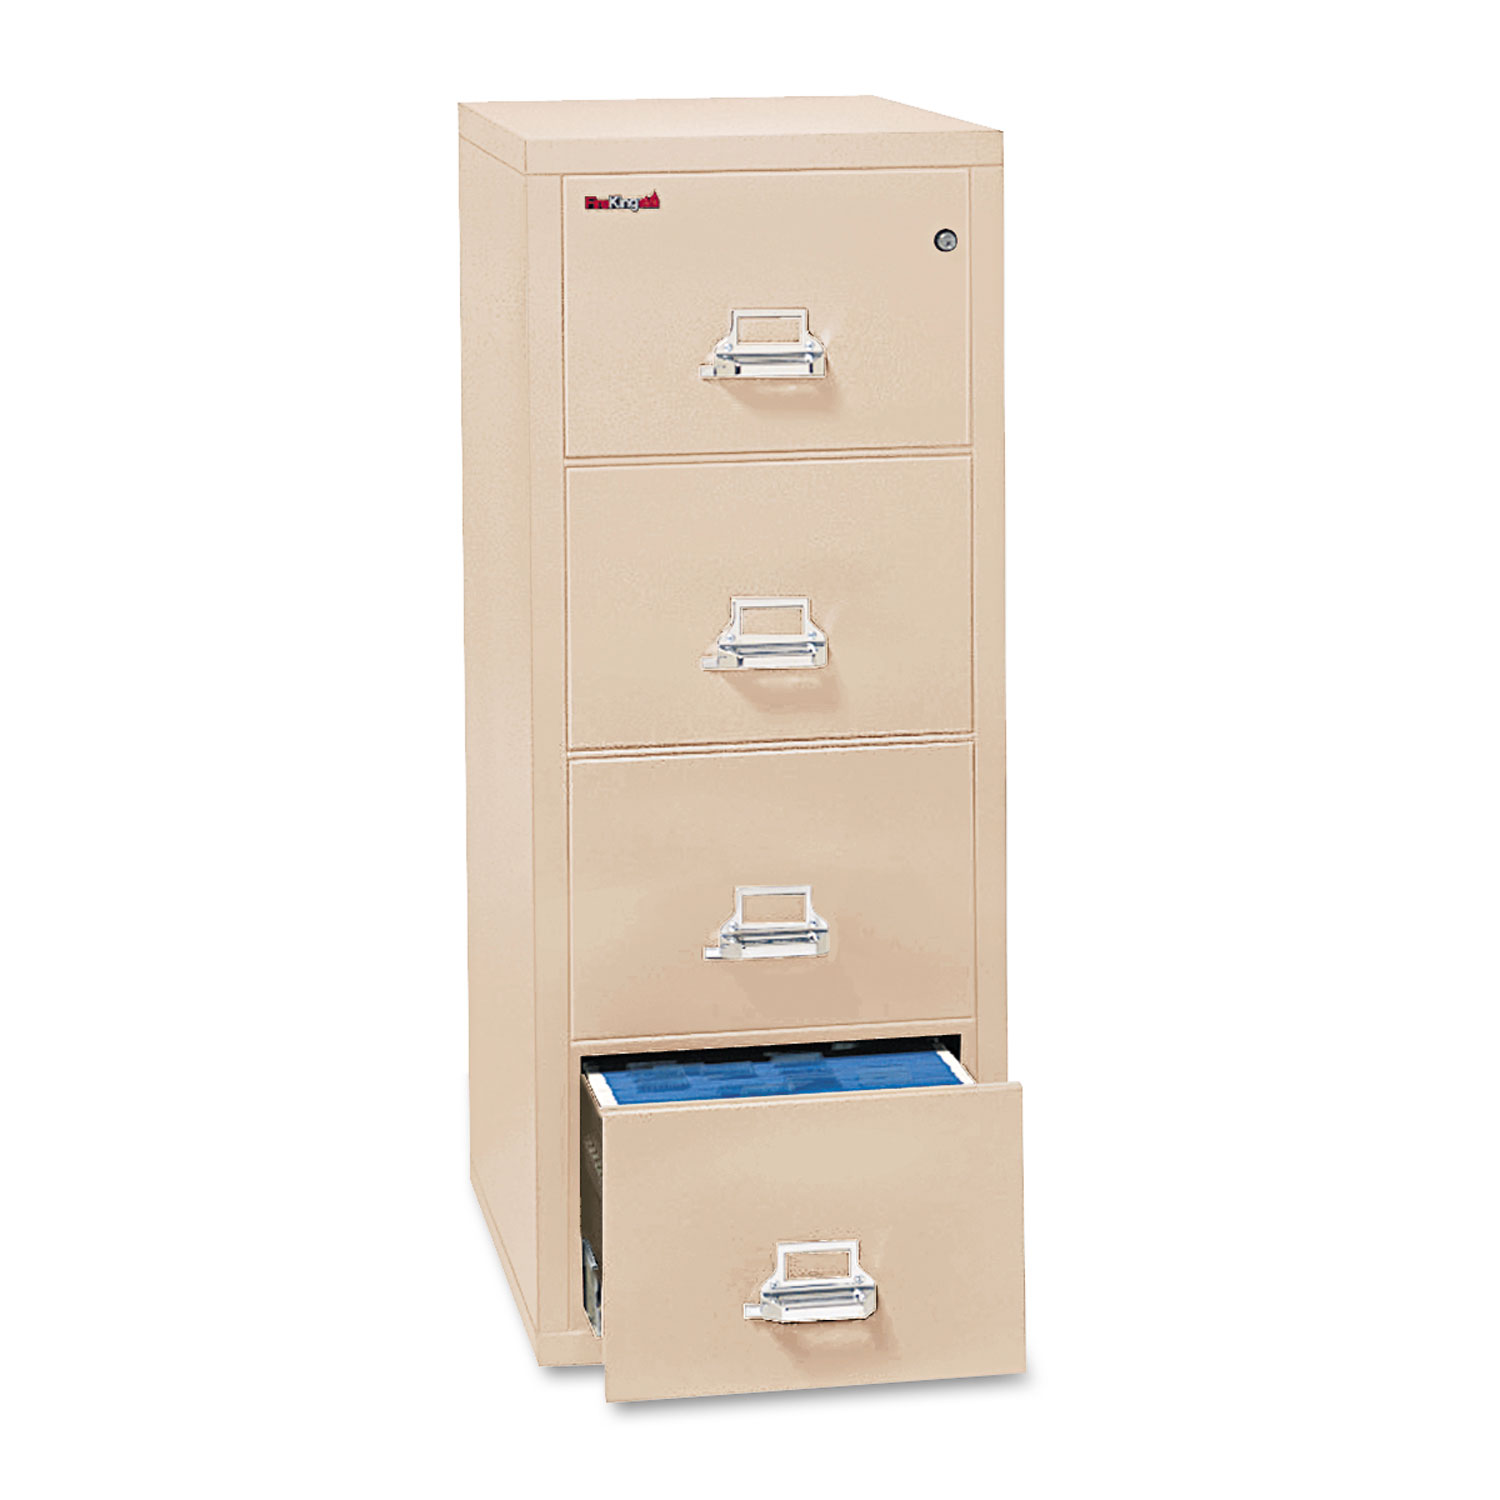  FireKing 4-1825-CPA Four-Drawer Vertical File, 17.75w x 25d x 52.75h, UL Listed 350°, Letter, Parchment (FIR41825CPA) 